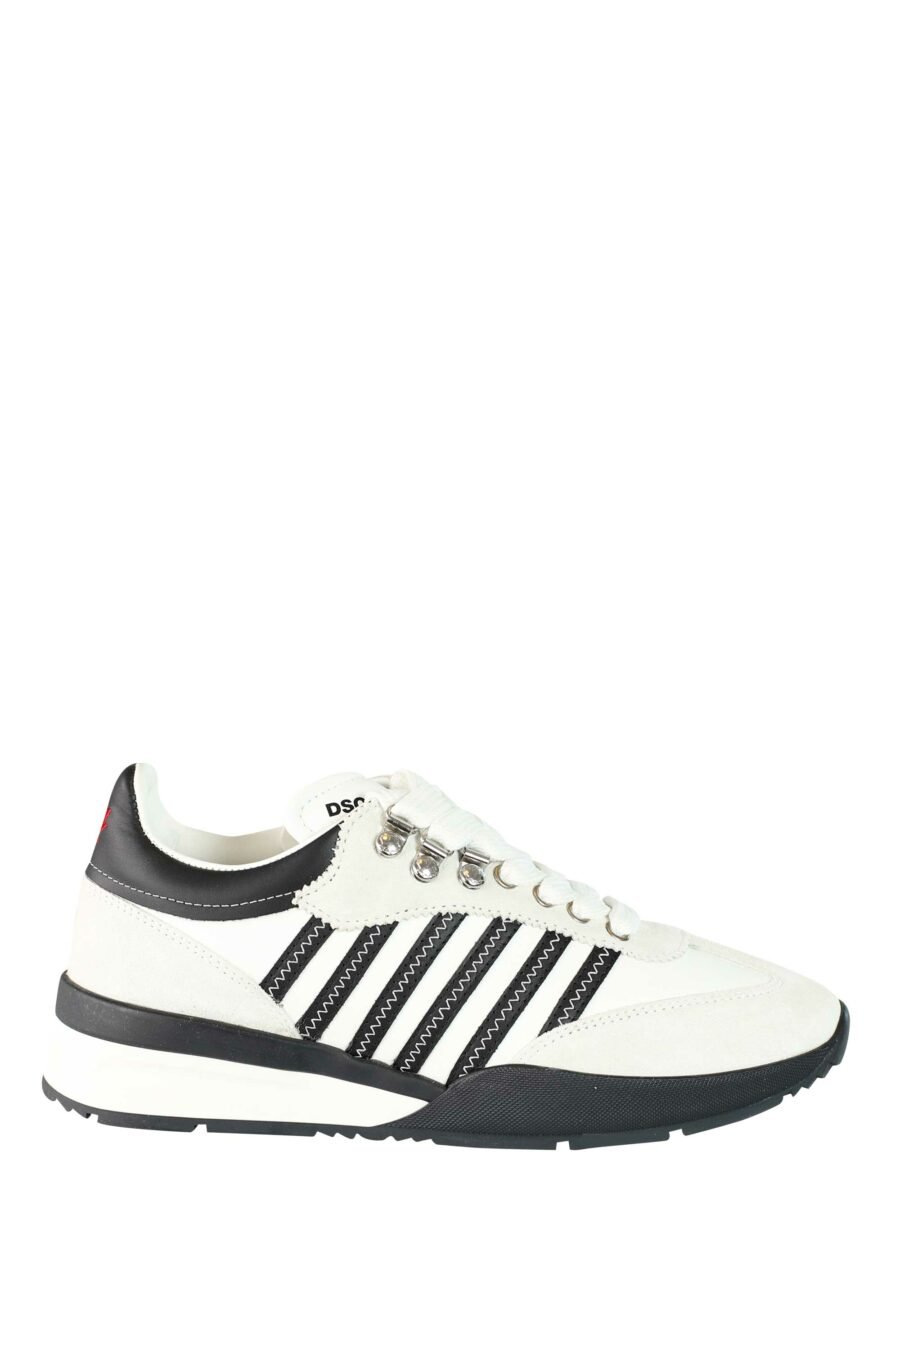 Trainers white mix "original legend" with two-tone sole and diagonal lines - 8055777186879